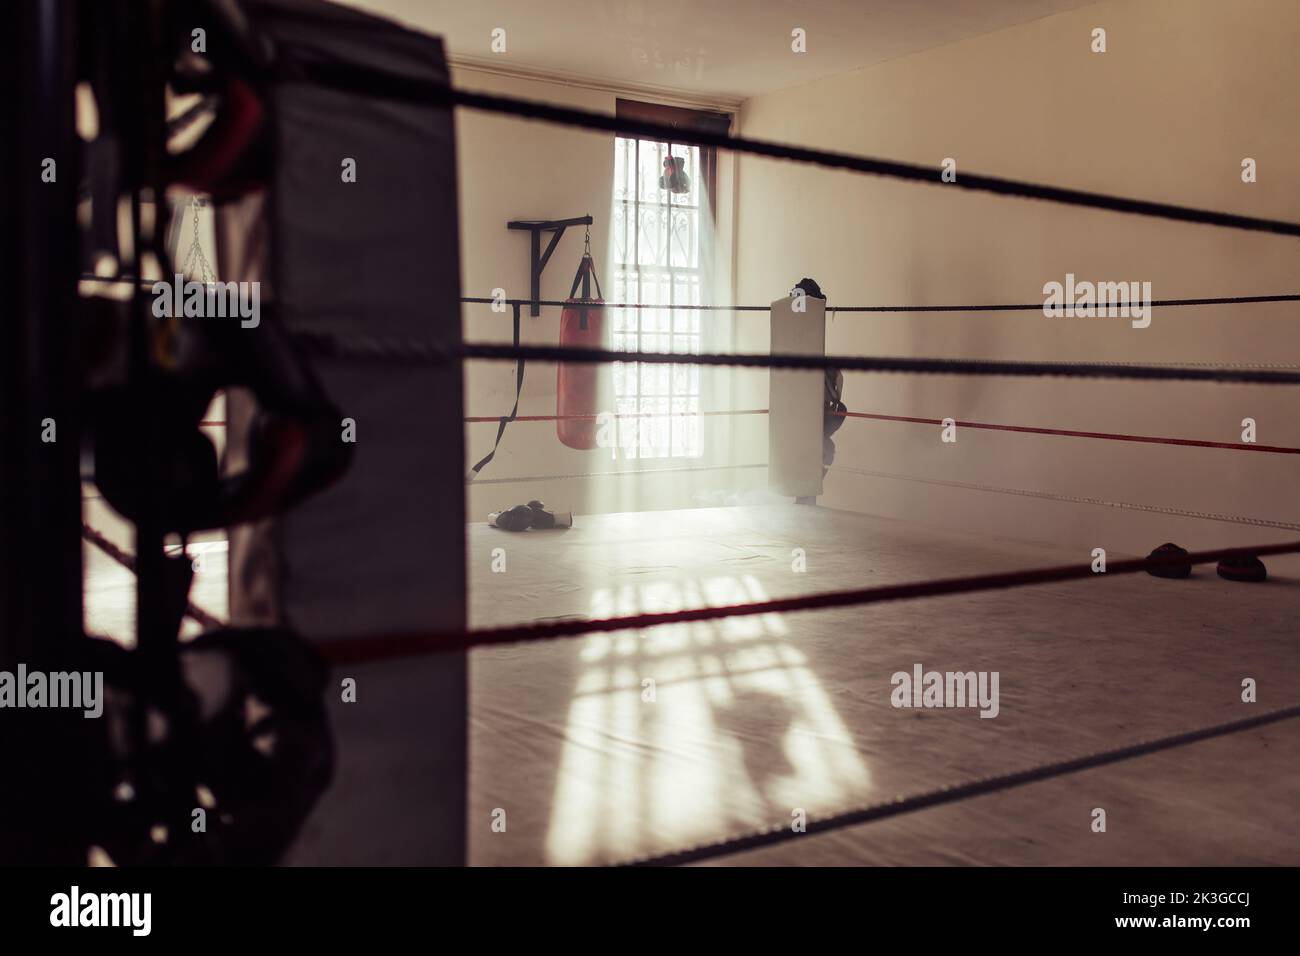 Empty boxing ring as seen from one corner of a boxing ring. Still life shot of a boxing gym during the day. Stock Photo